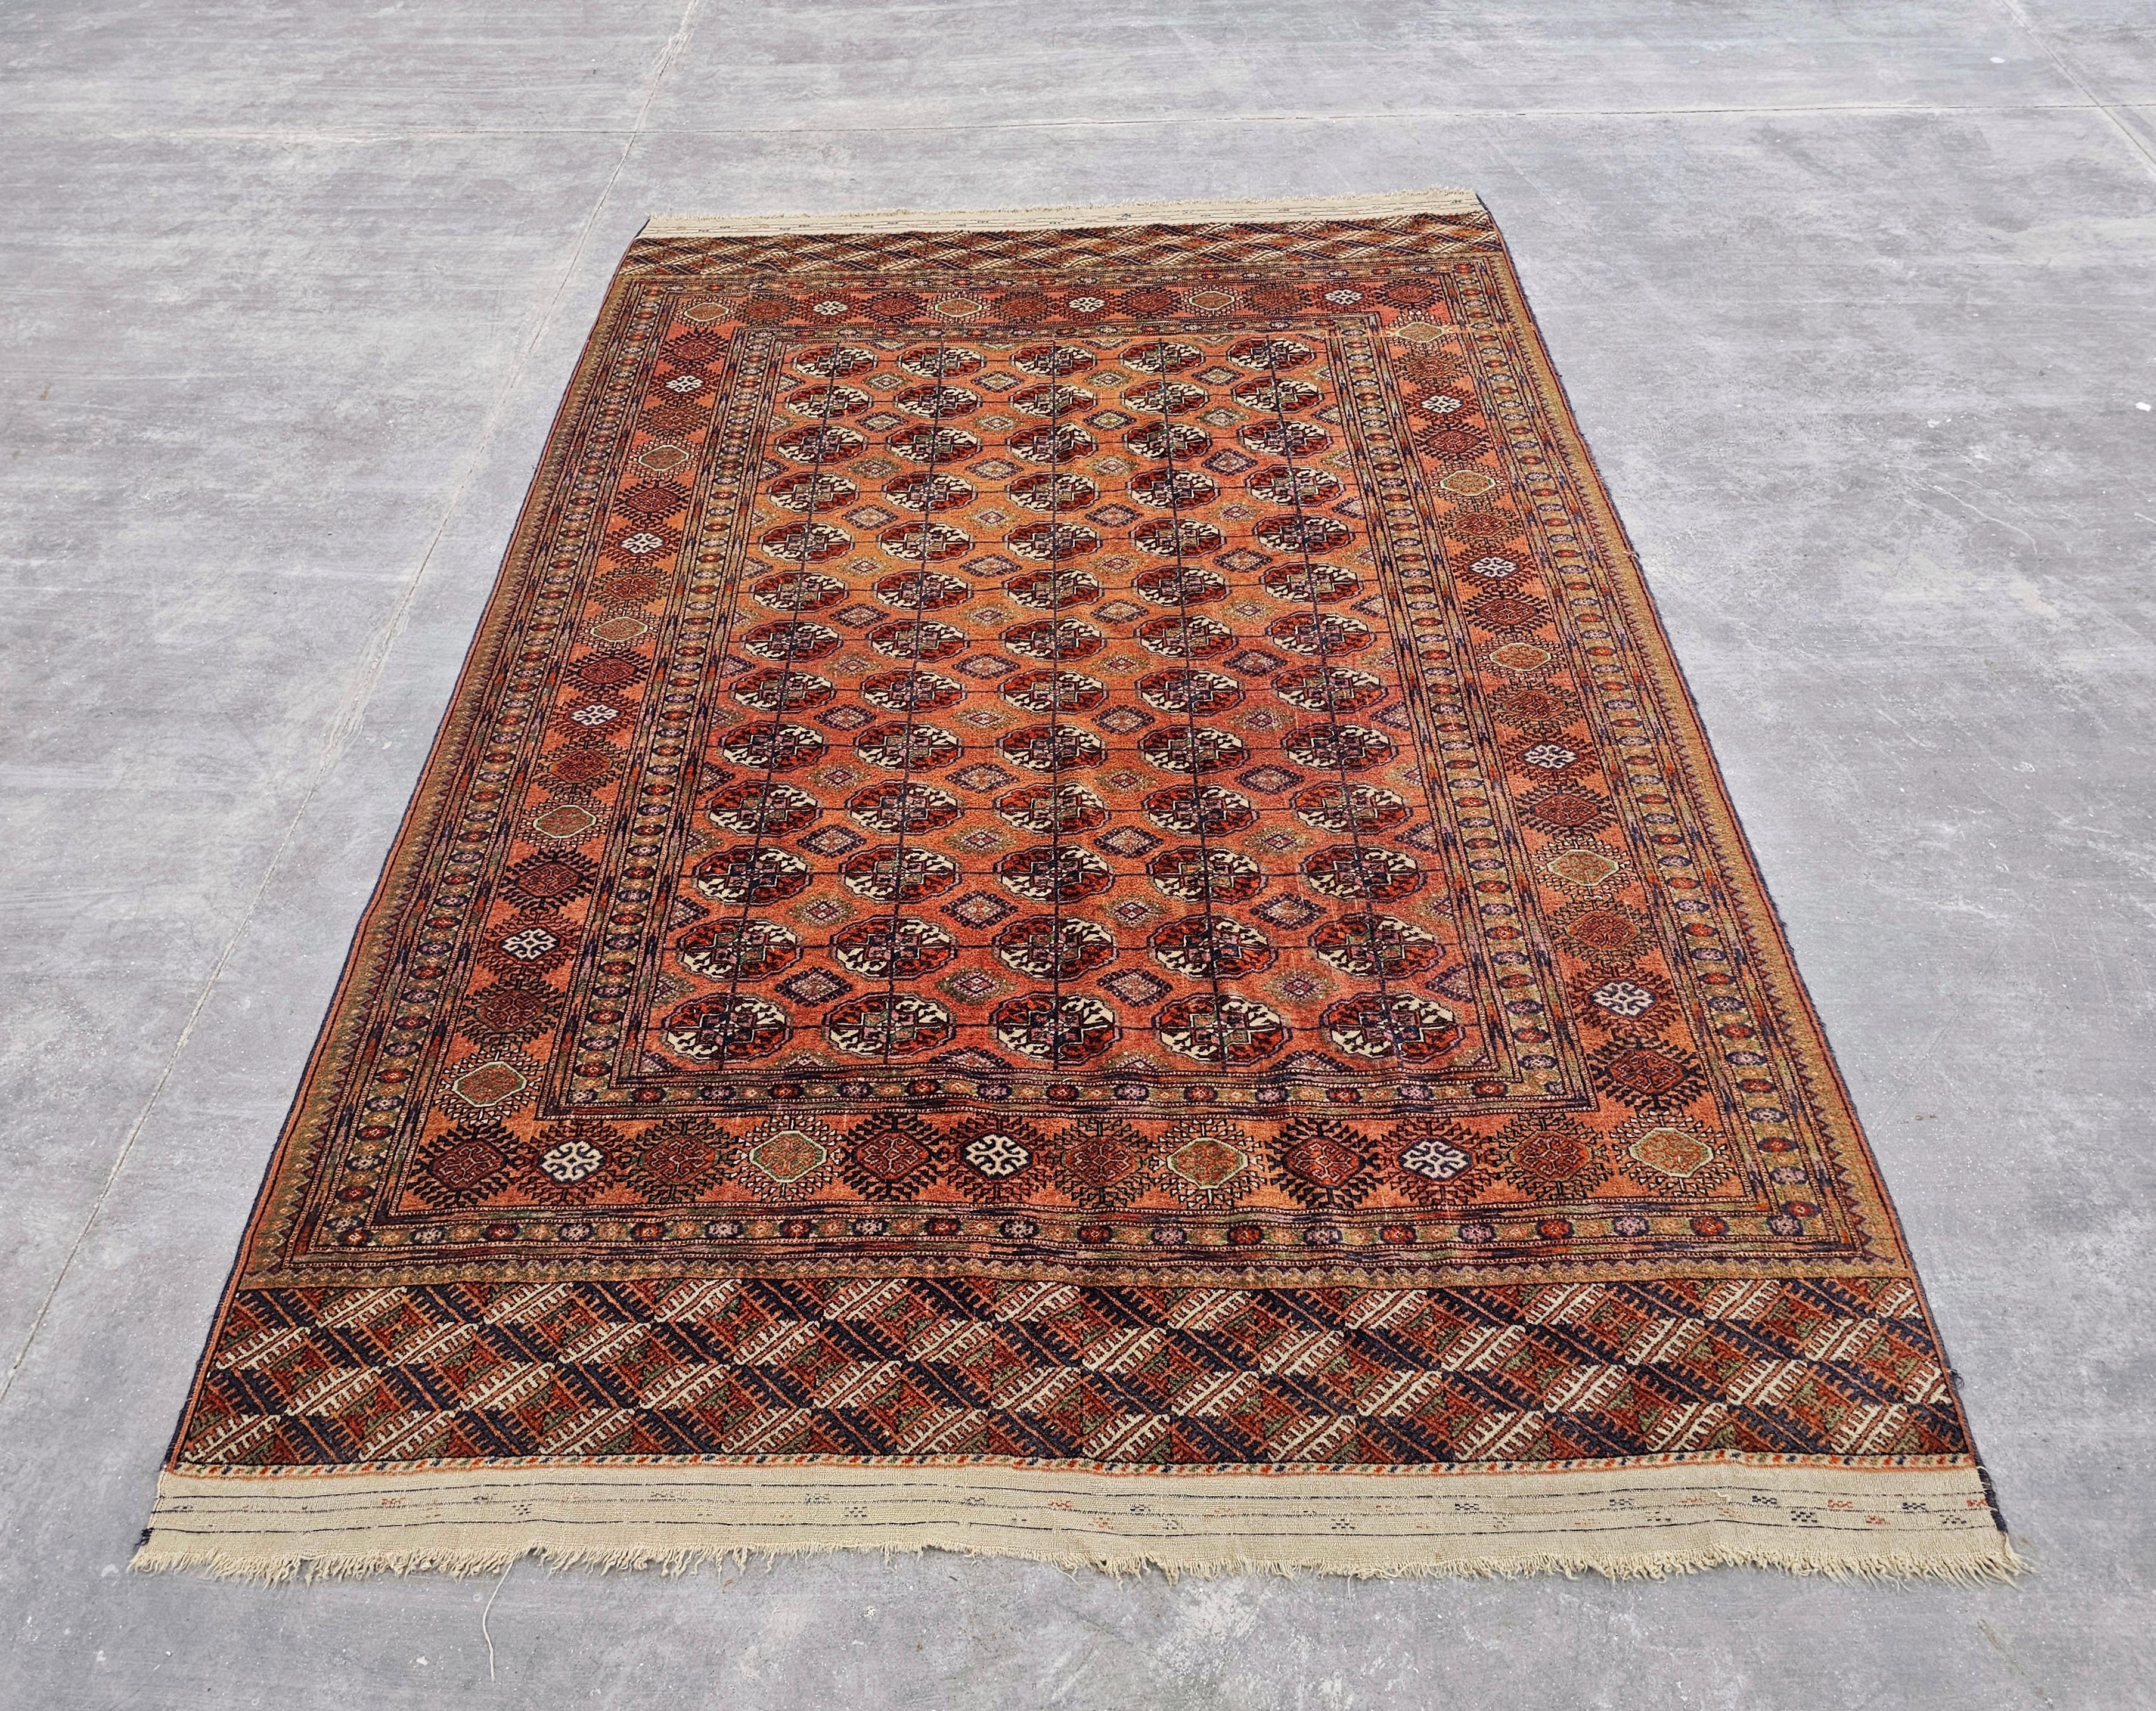 In this listing you will find a beautiful antique hand-knotted Bokhara rug. This oriental rug was made in the beginning of the 20th century in the region of Turkmenistan. It features a very rare brick orange/red-ish colour, almost the colour of